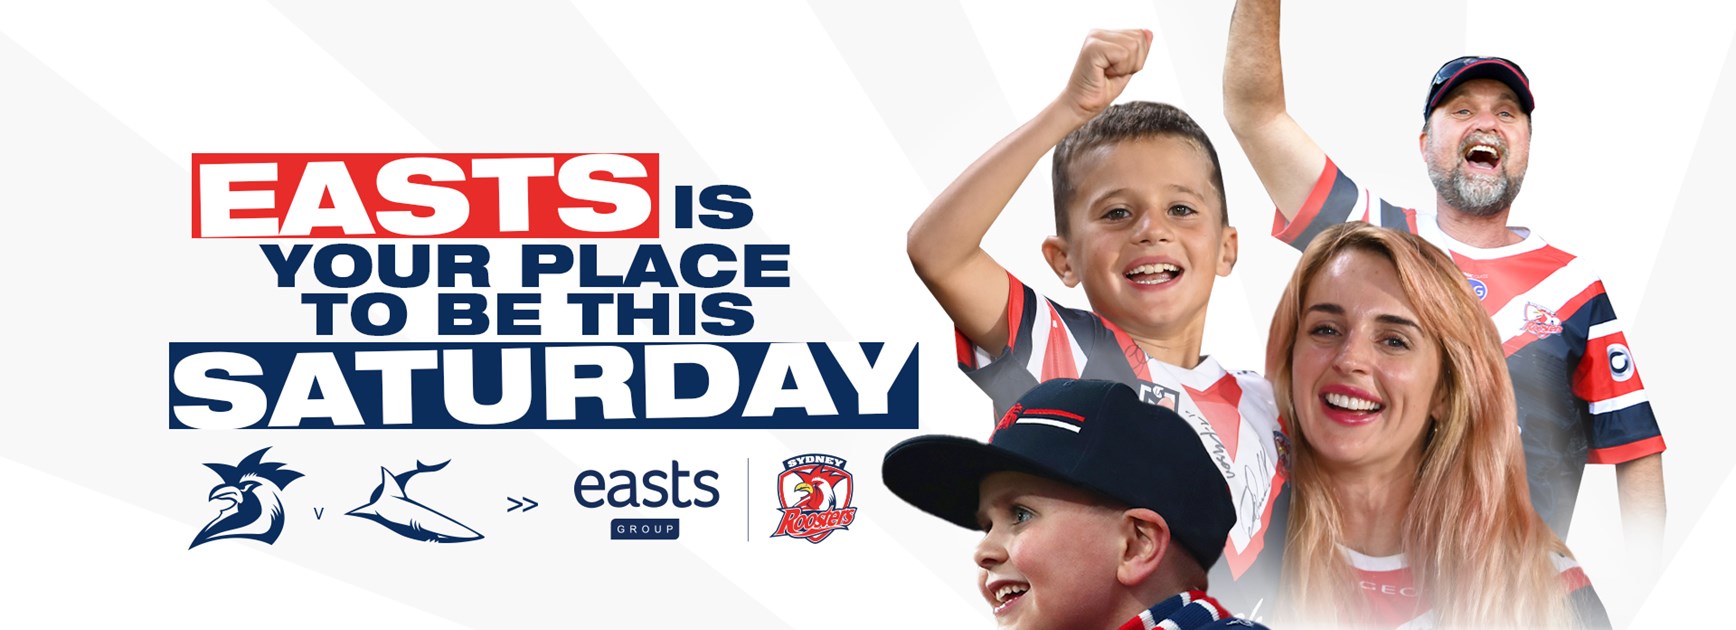 Easts Bondi Junction is your place to be this Saturday!